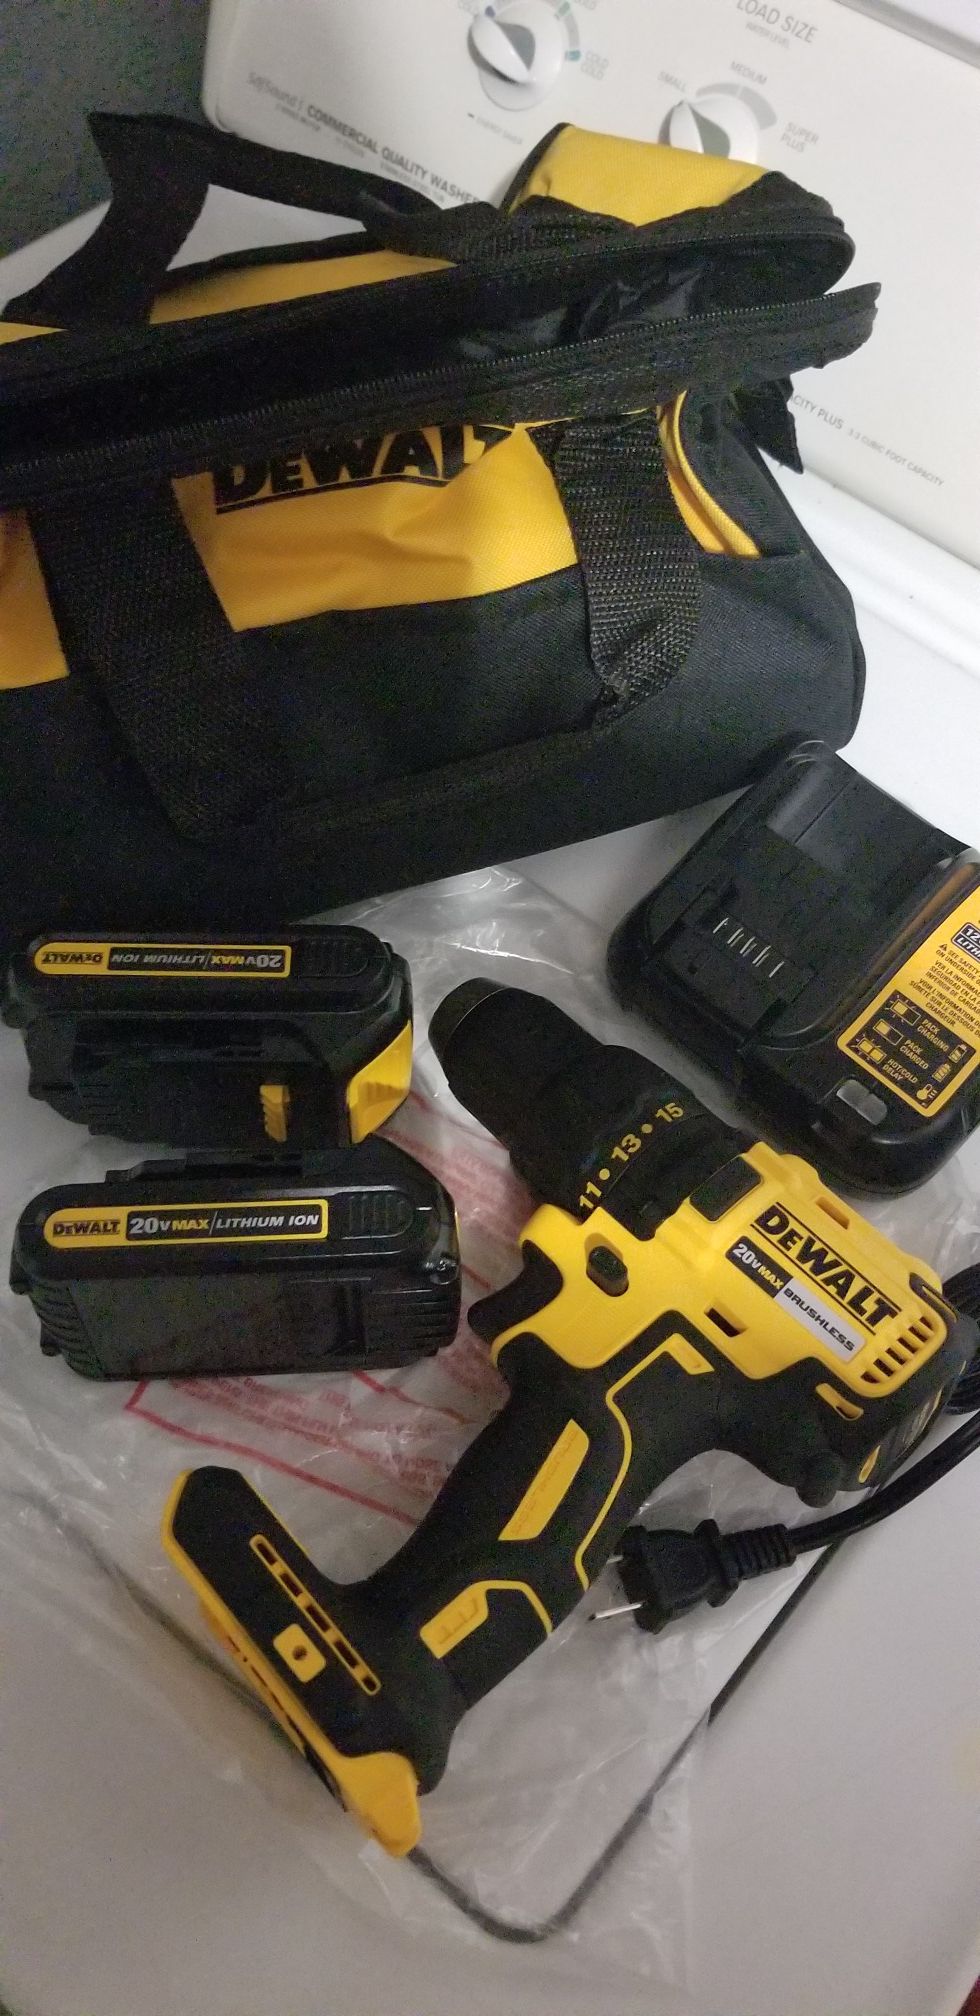 Dewalt drill 2 battery and charger